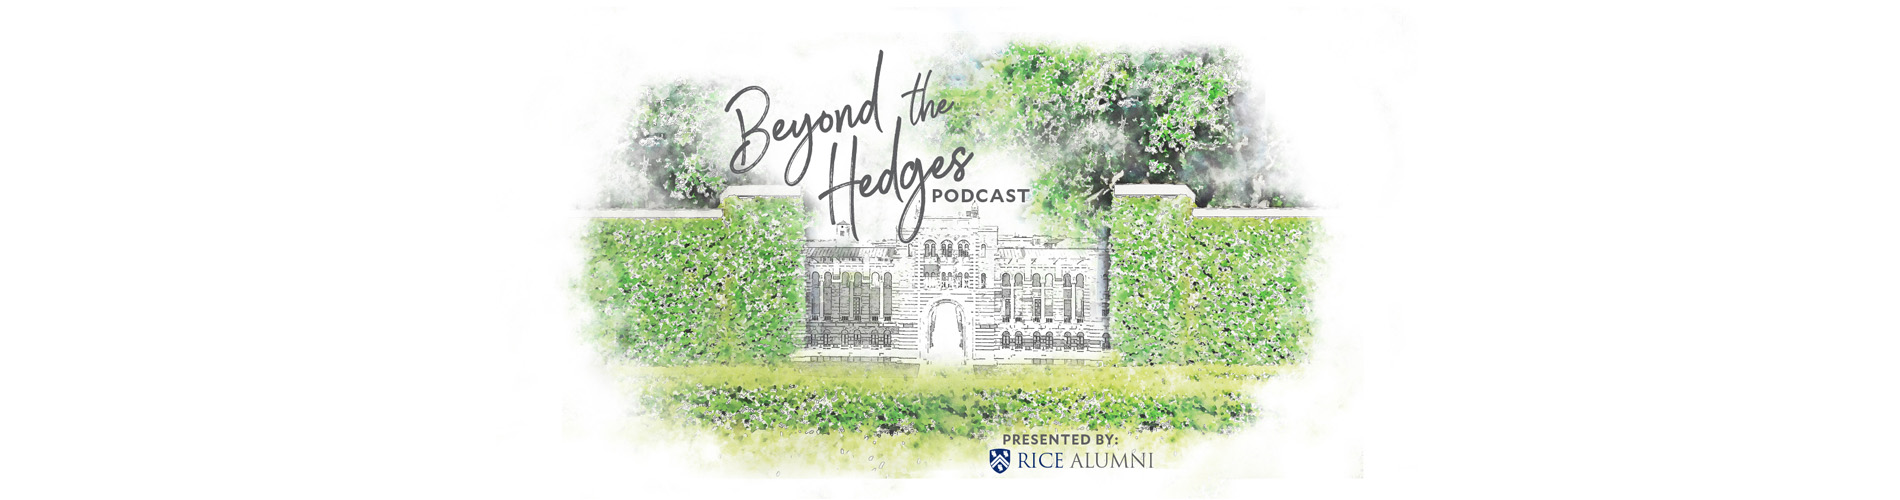 Beyond the Hedges